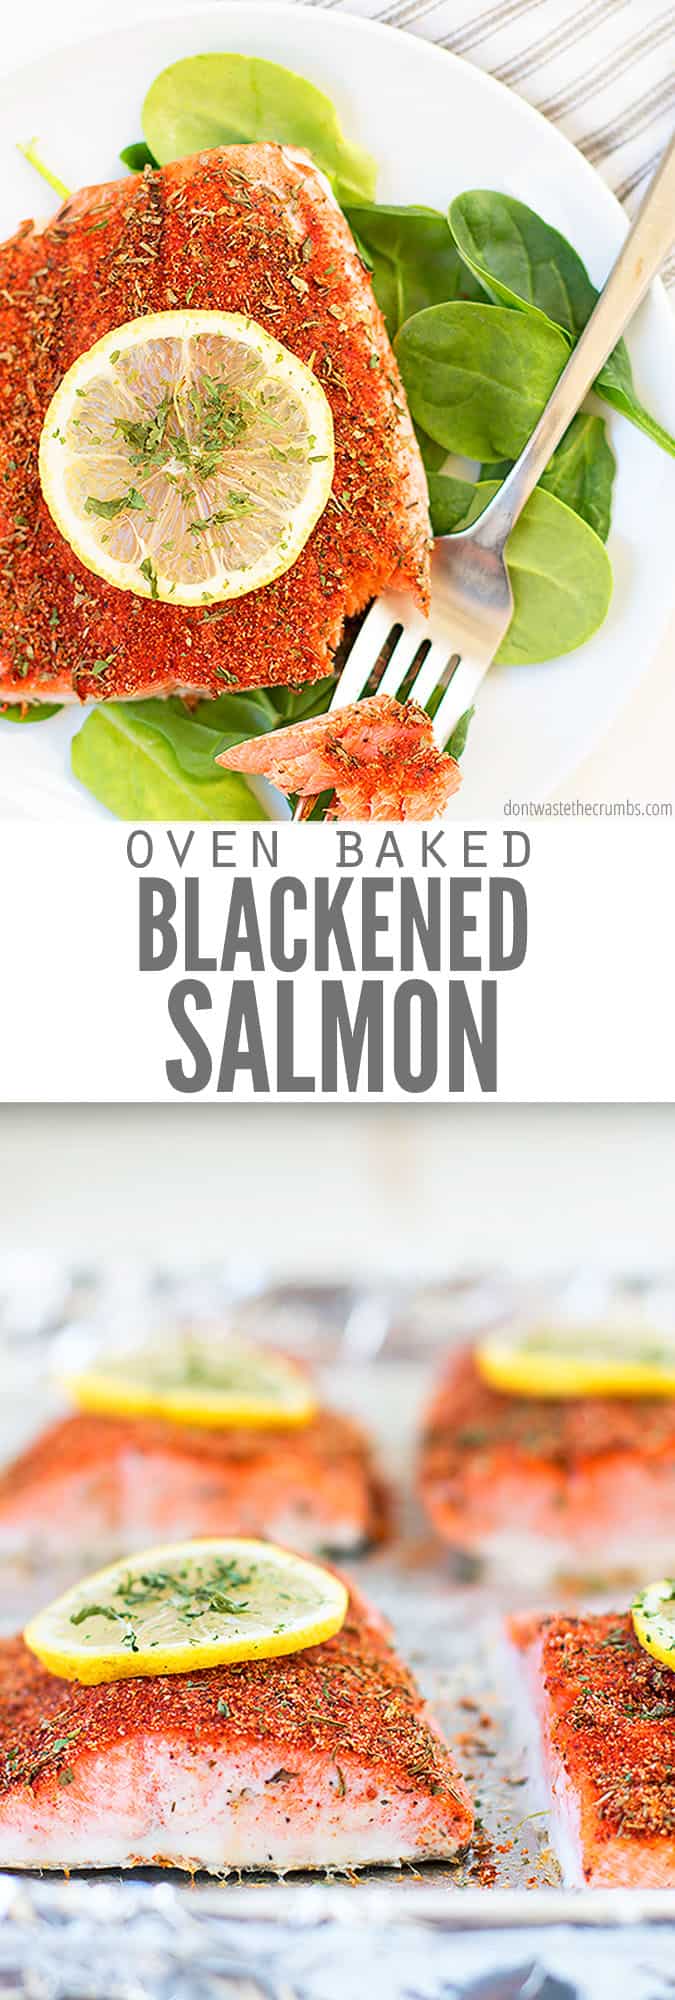 Blackened Salmon - Don't Waste the Crumbs